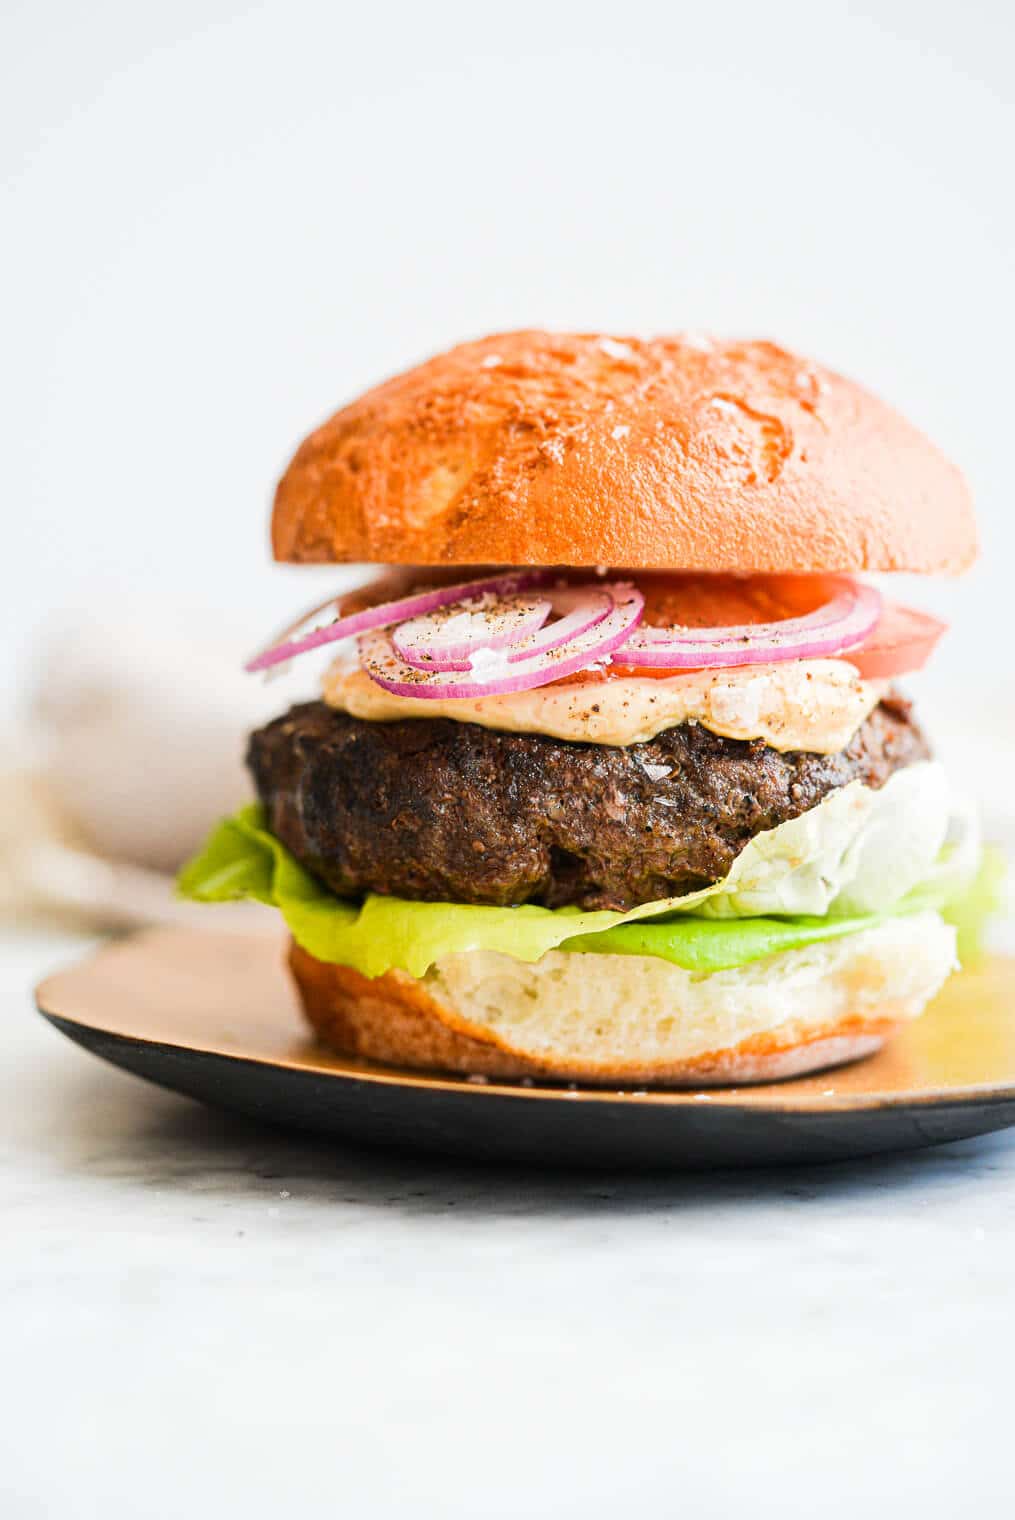 a beef burger on a bun topped with lettuce, tomato, red onion, and chipotle mayo.